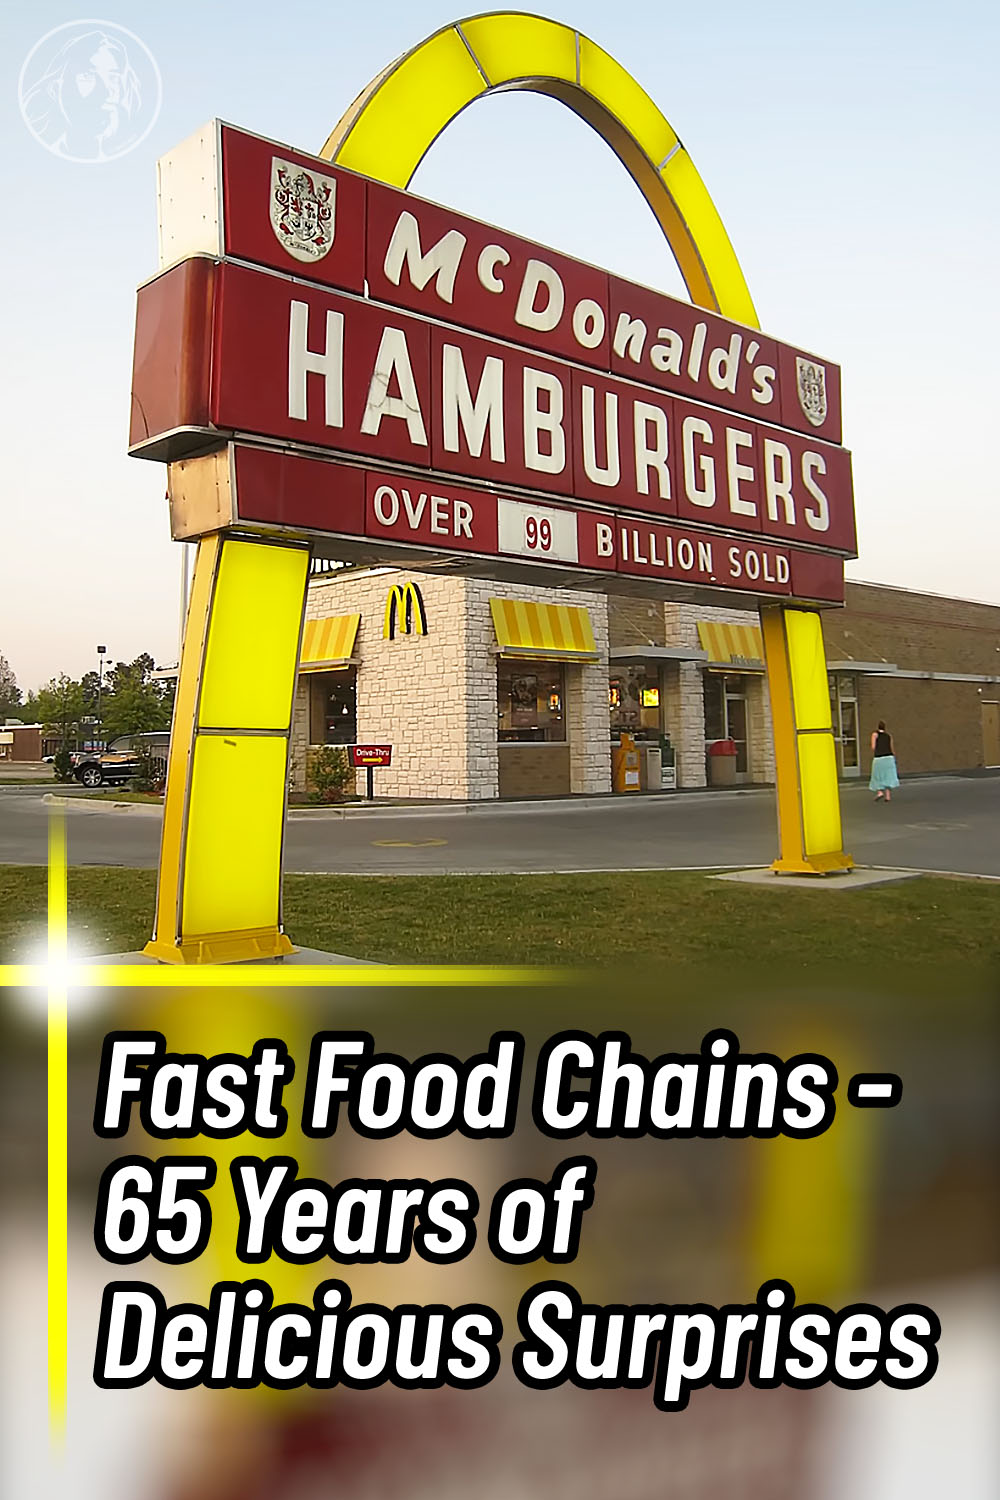 Fast Food Chains - 65 Years of Delicious Surprises